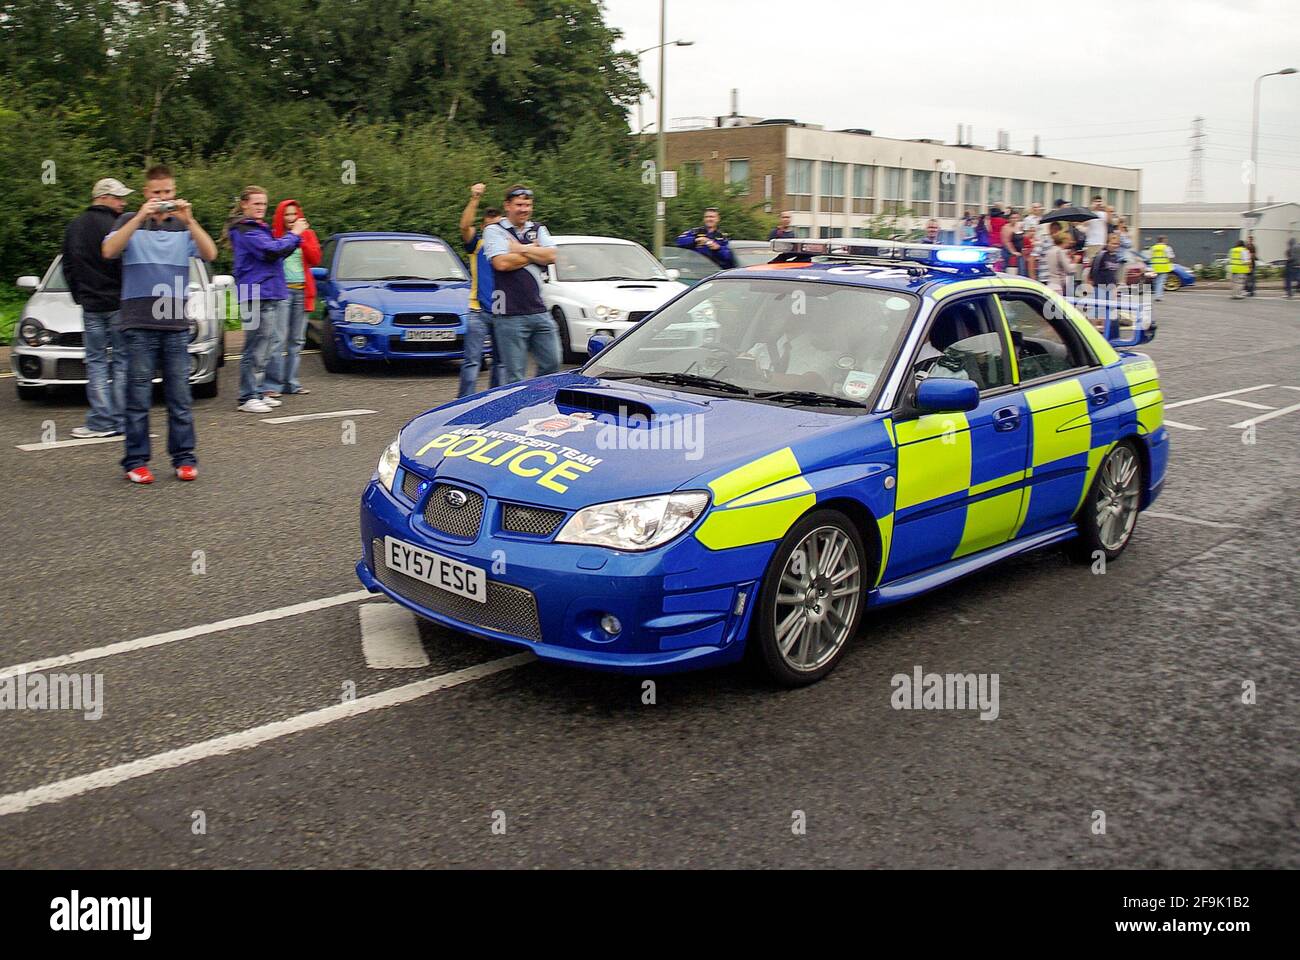 Police Interceptors. ANPR equipped police car made famous by TV programme, at a car event at the Prodrive racing car centre. Driving past public Stock Photo